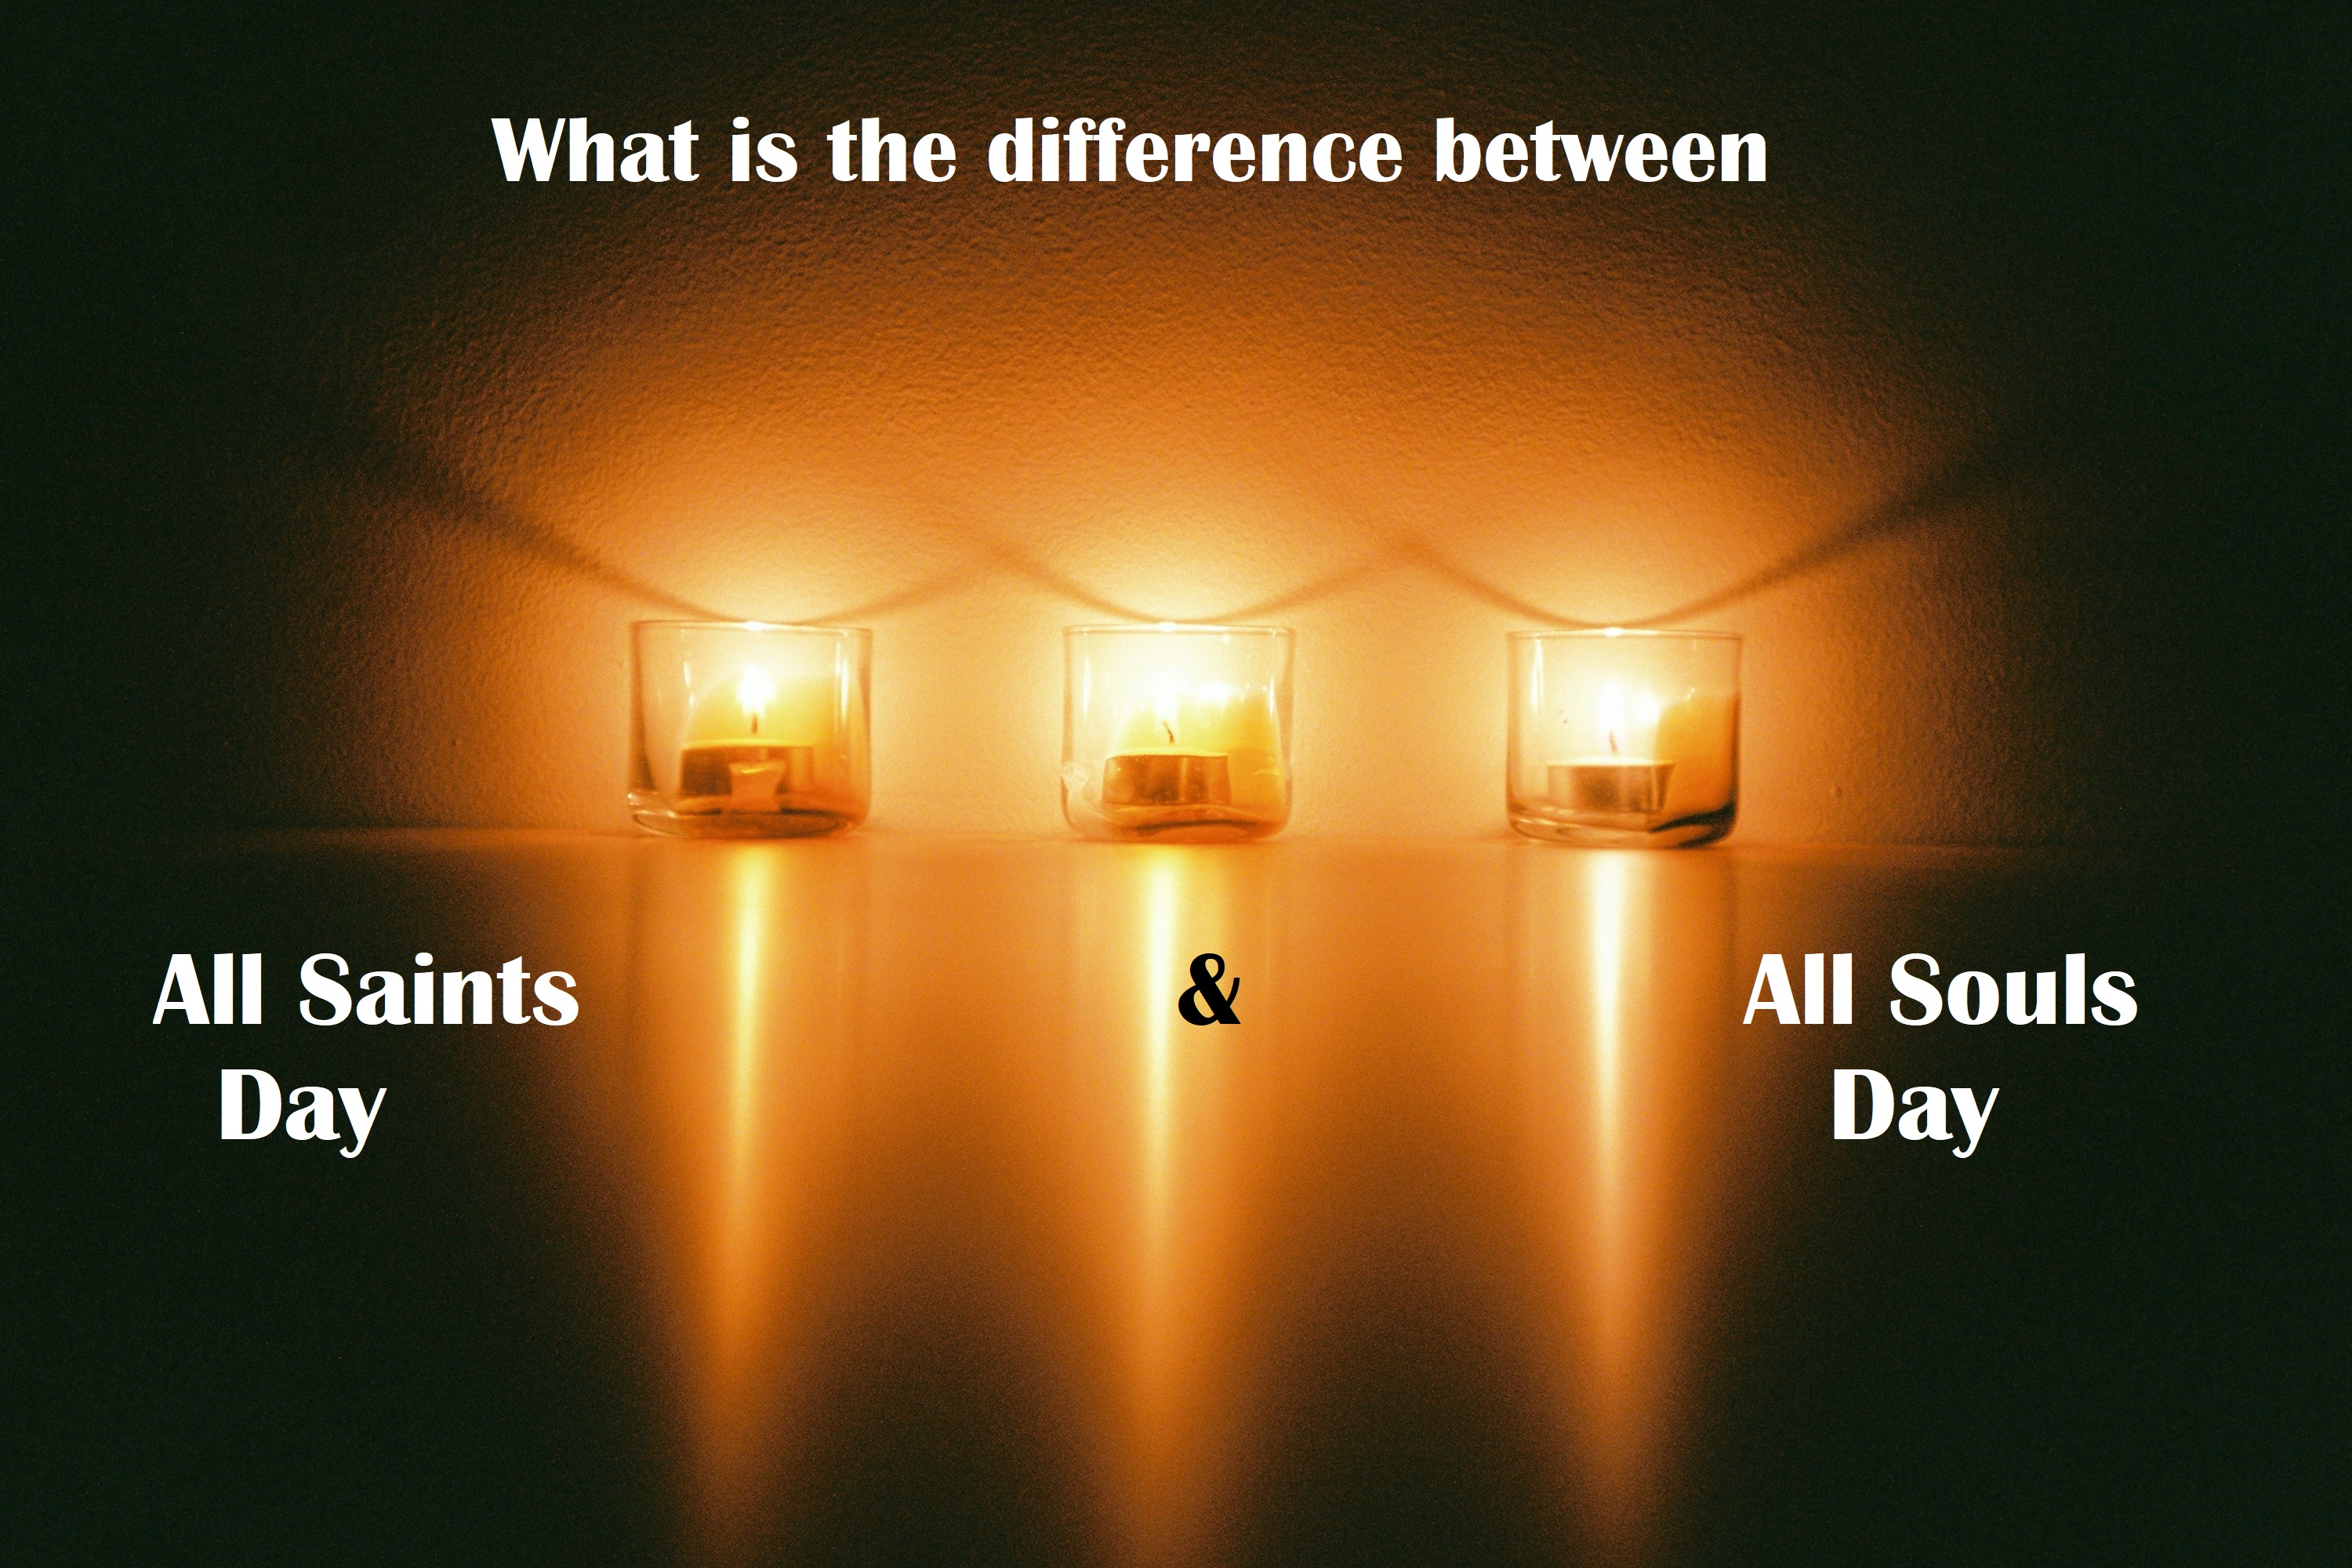 What would be the difference between All Saints Day and All Souls Day